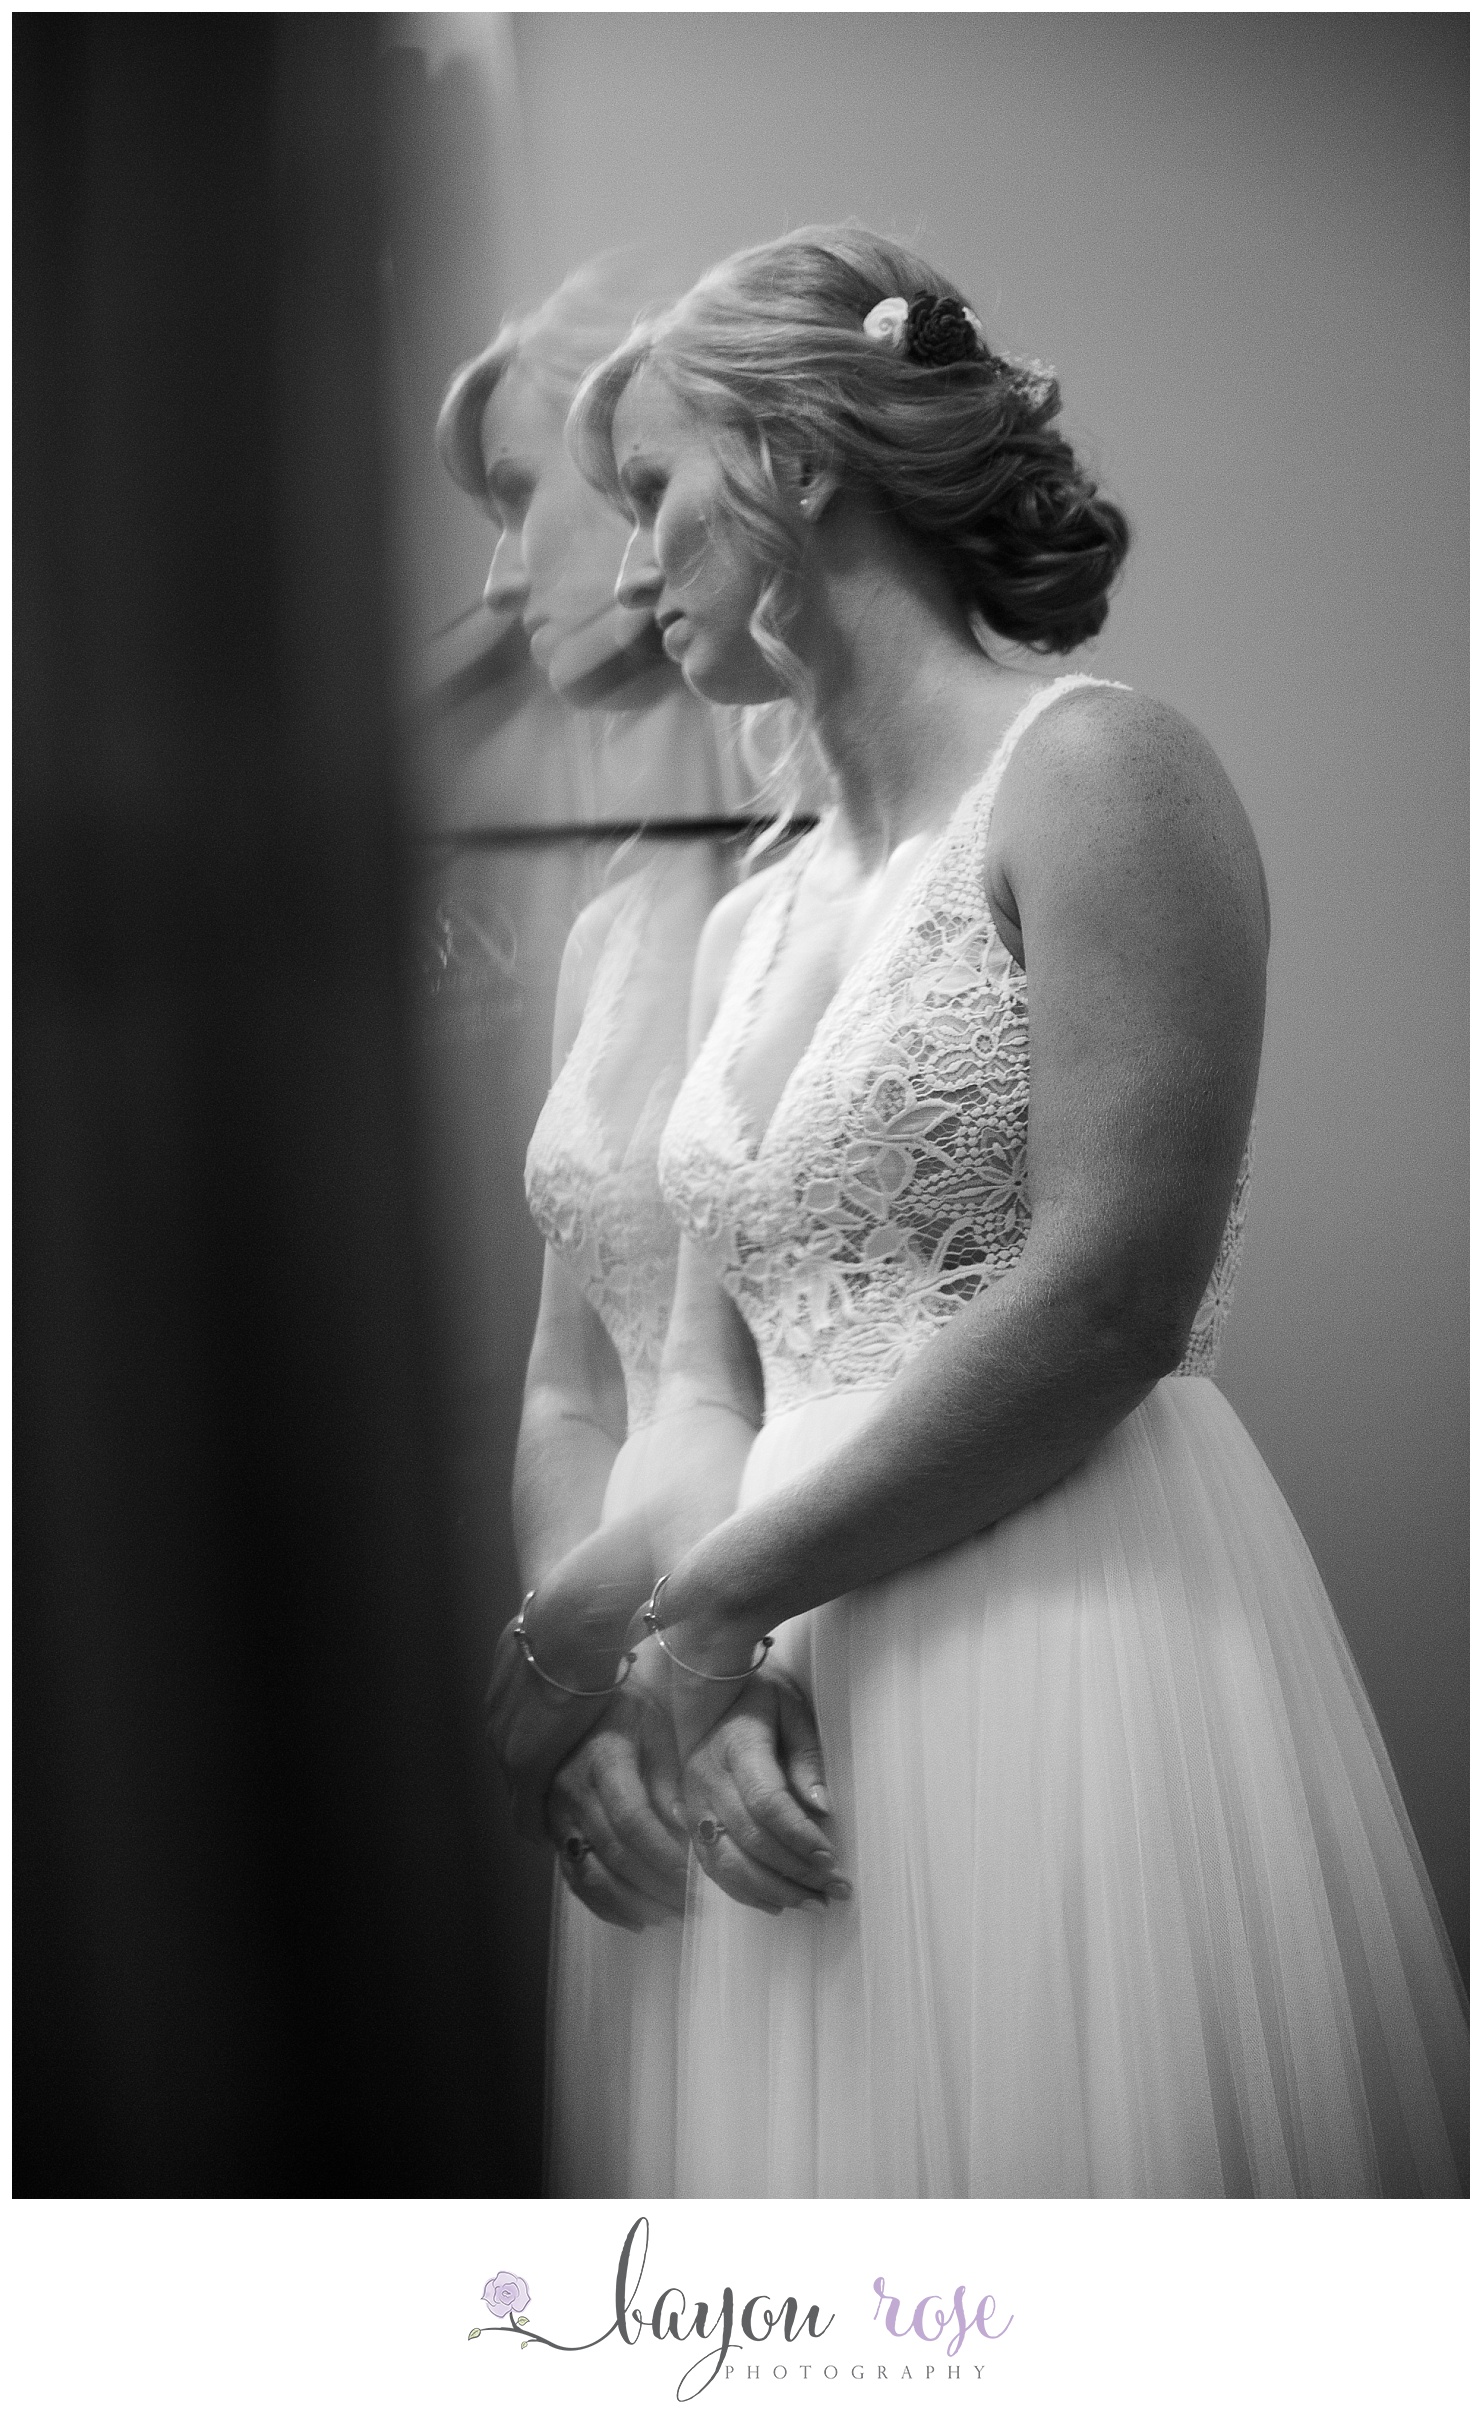 Artistic photo of bride reflected in beveled mirror